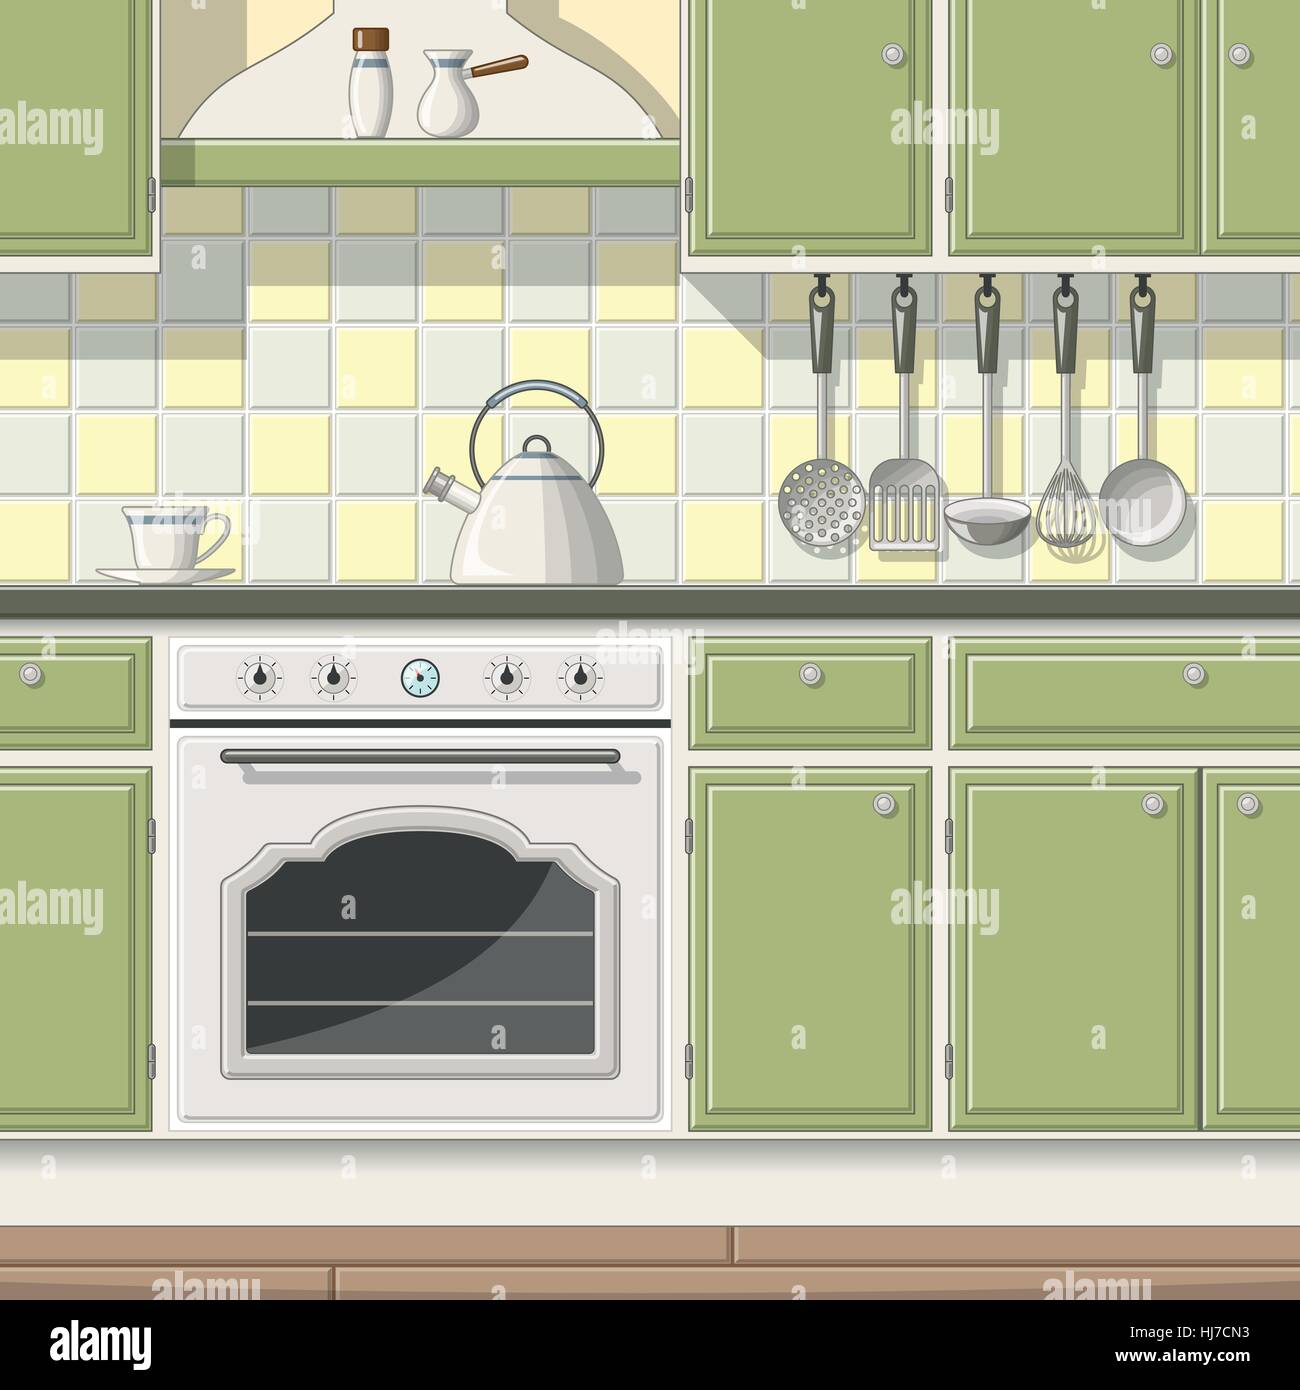 Illustration of a classic kitchen Stock Vector